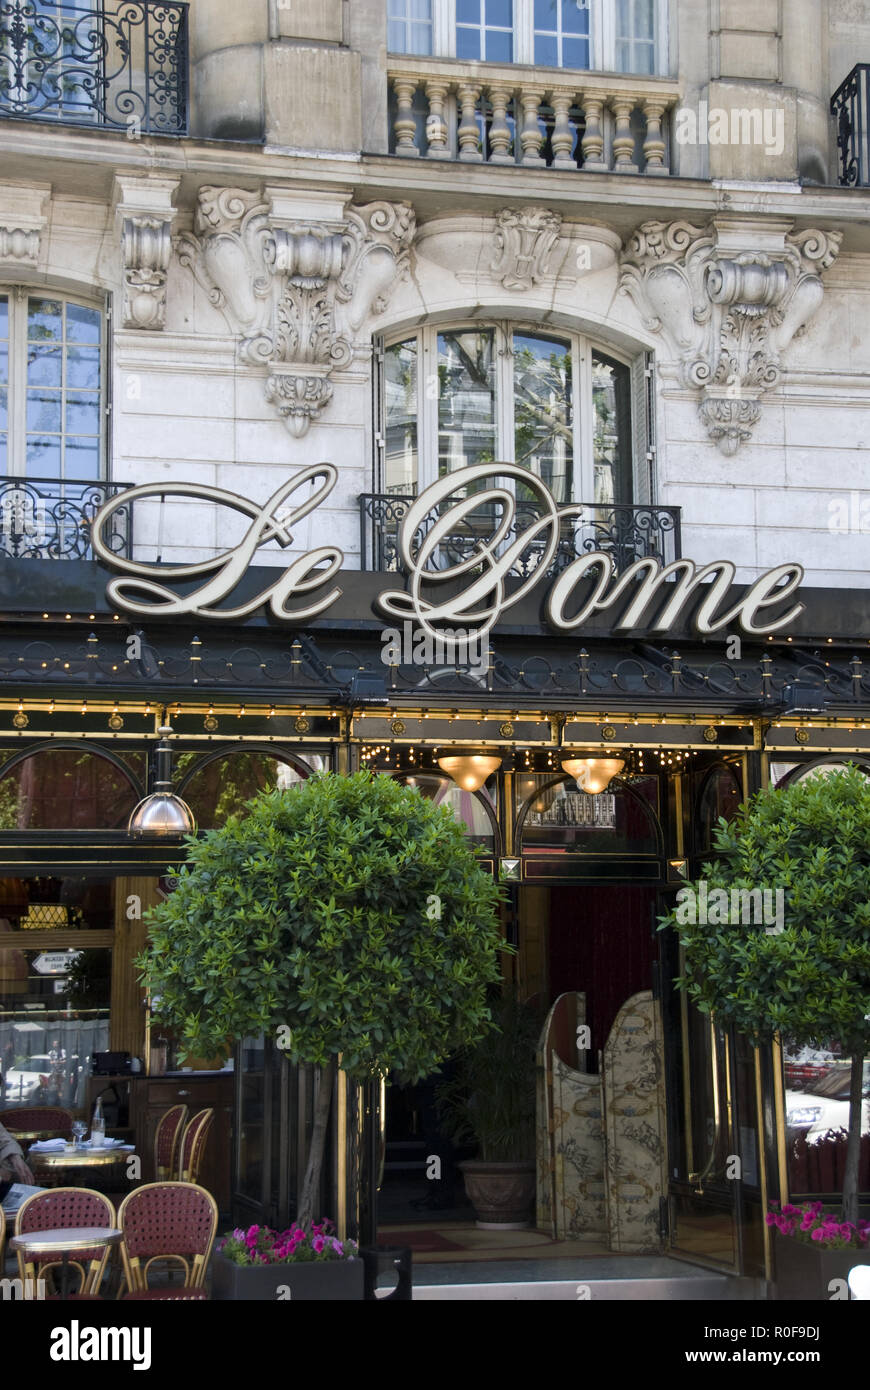 Le Dome, an historic cafe that was popular with many writers and artists in the Montparnasse area of Paris, France. Stock Photo